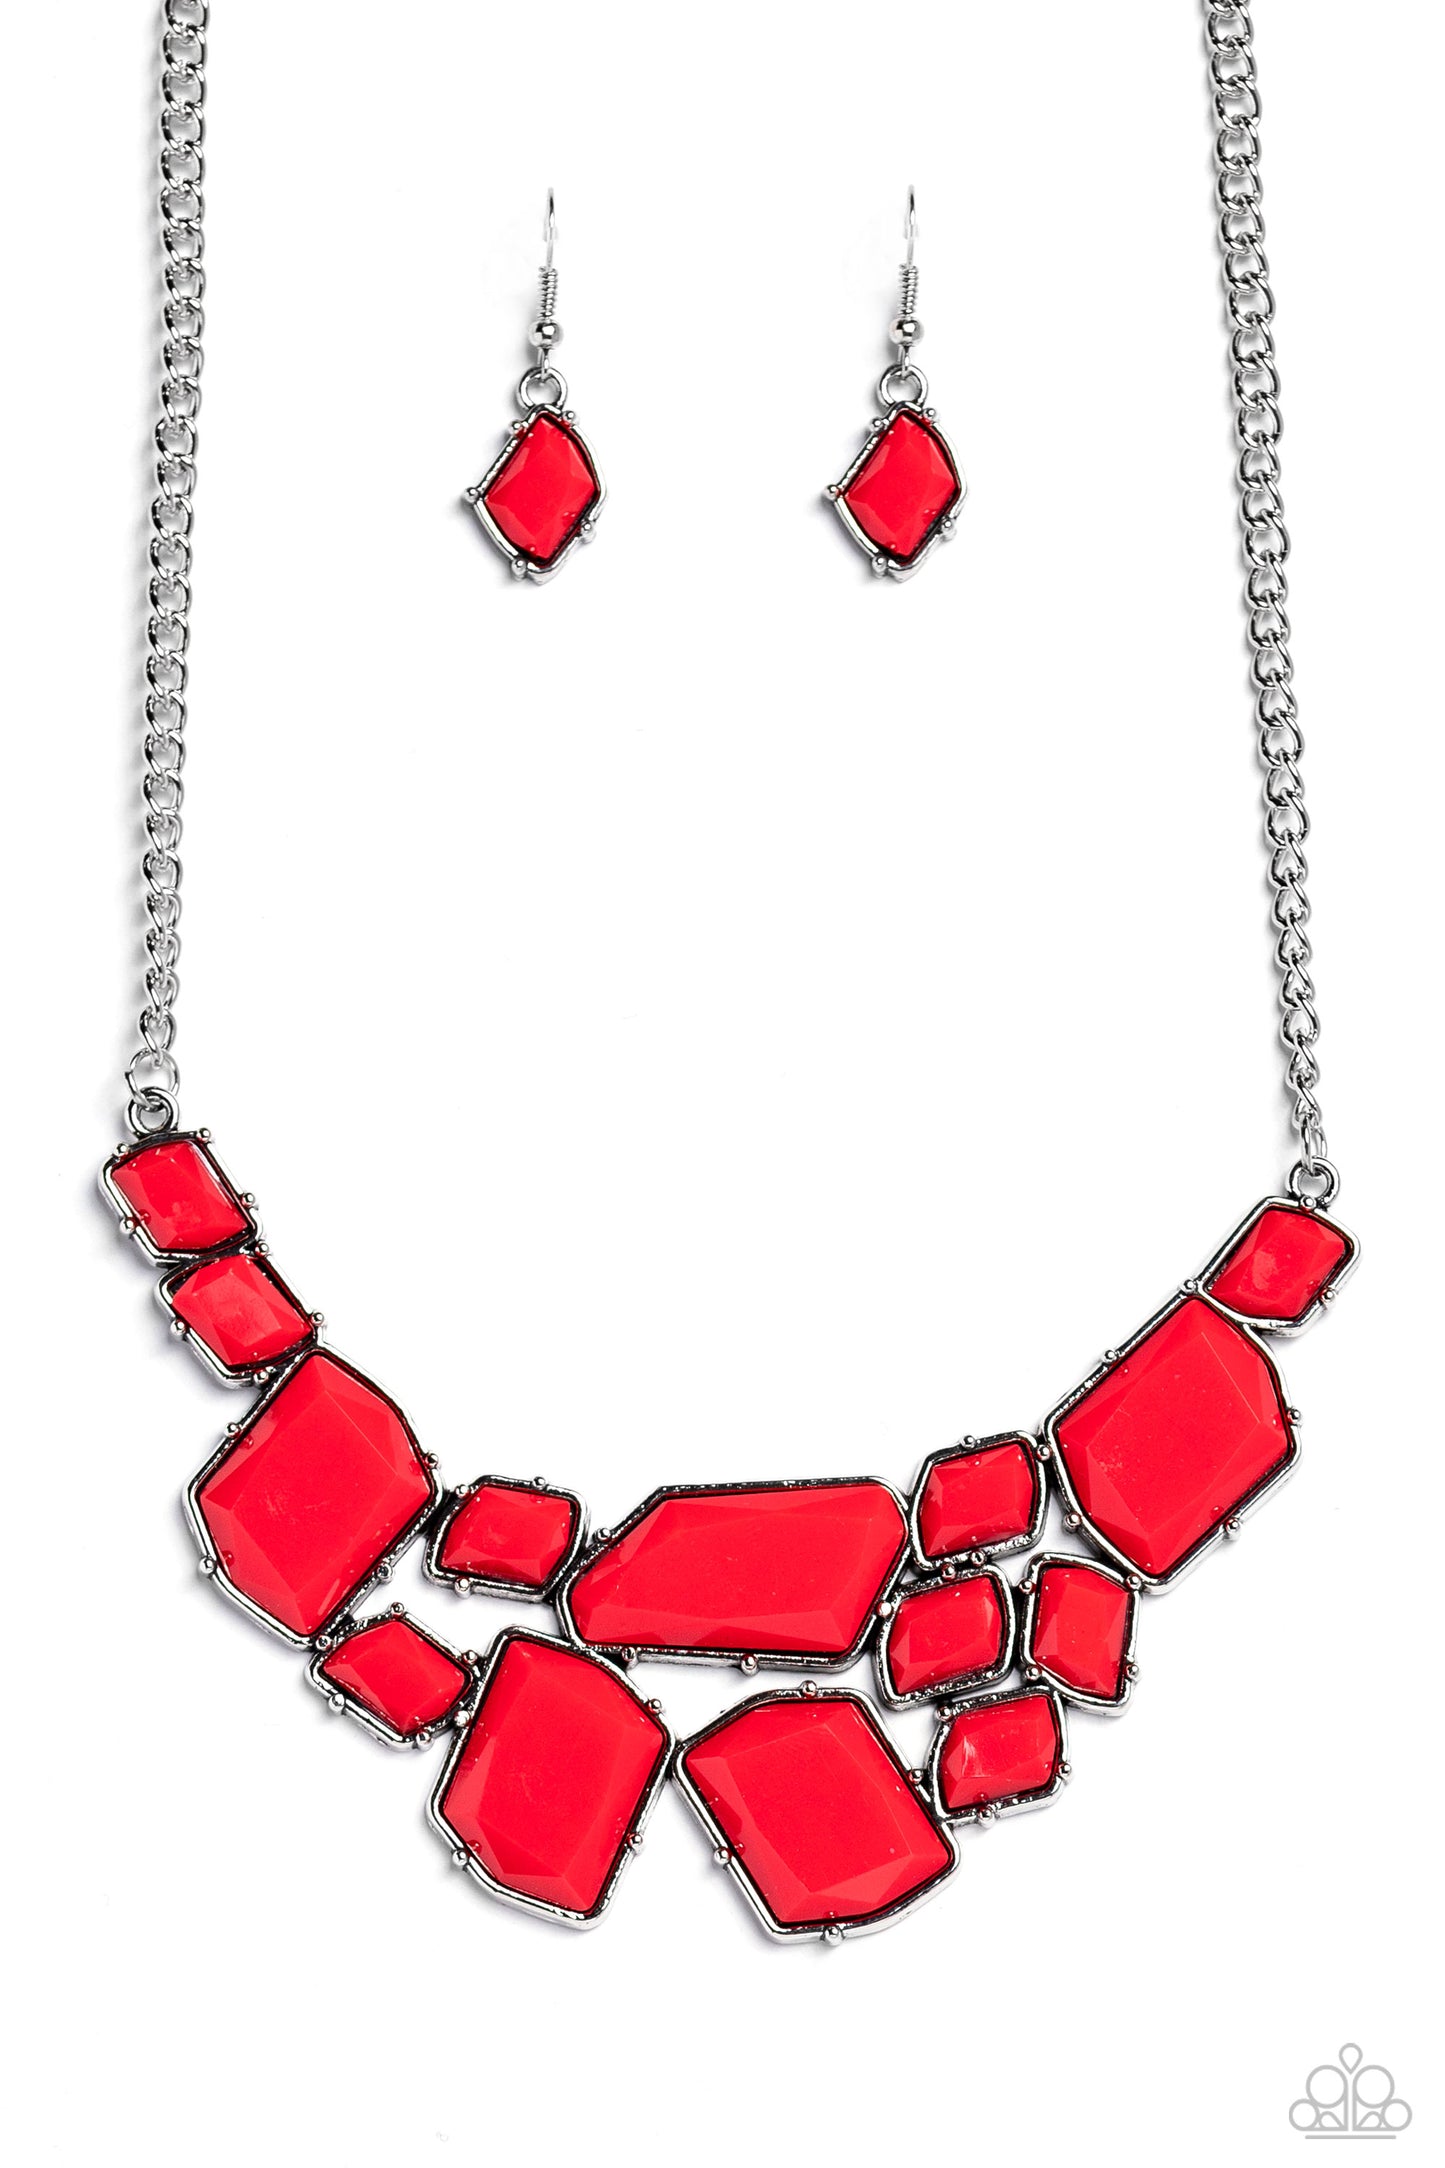 Energetic Embers - red - Paparazzi necklace